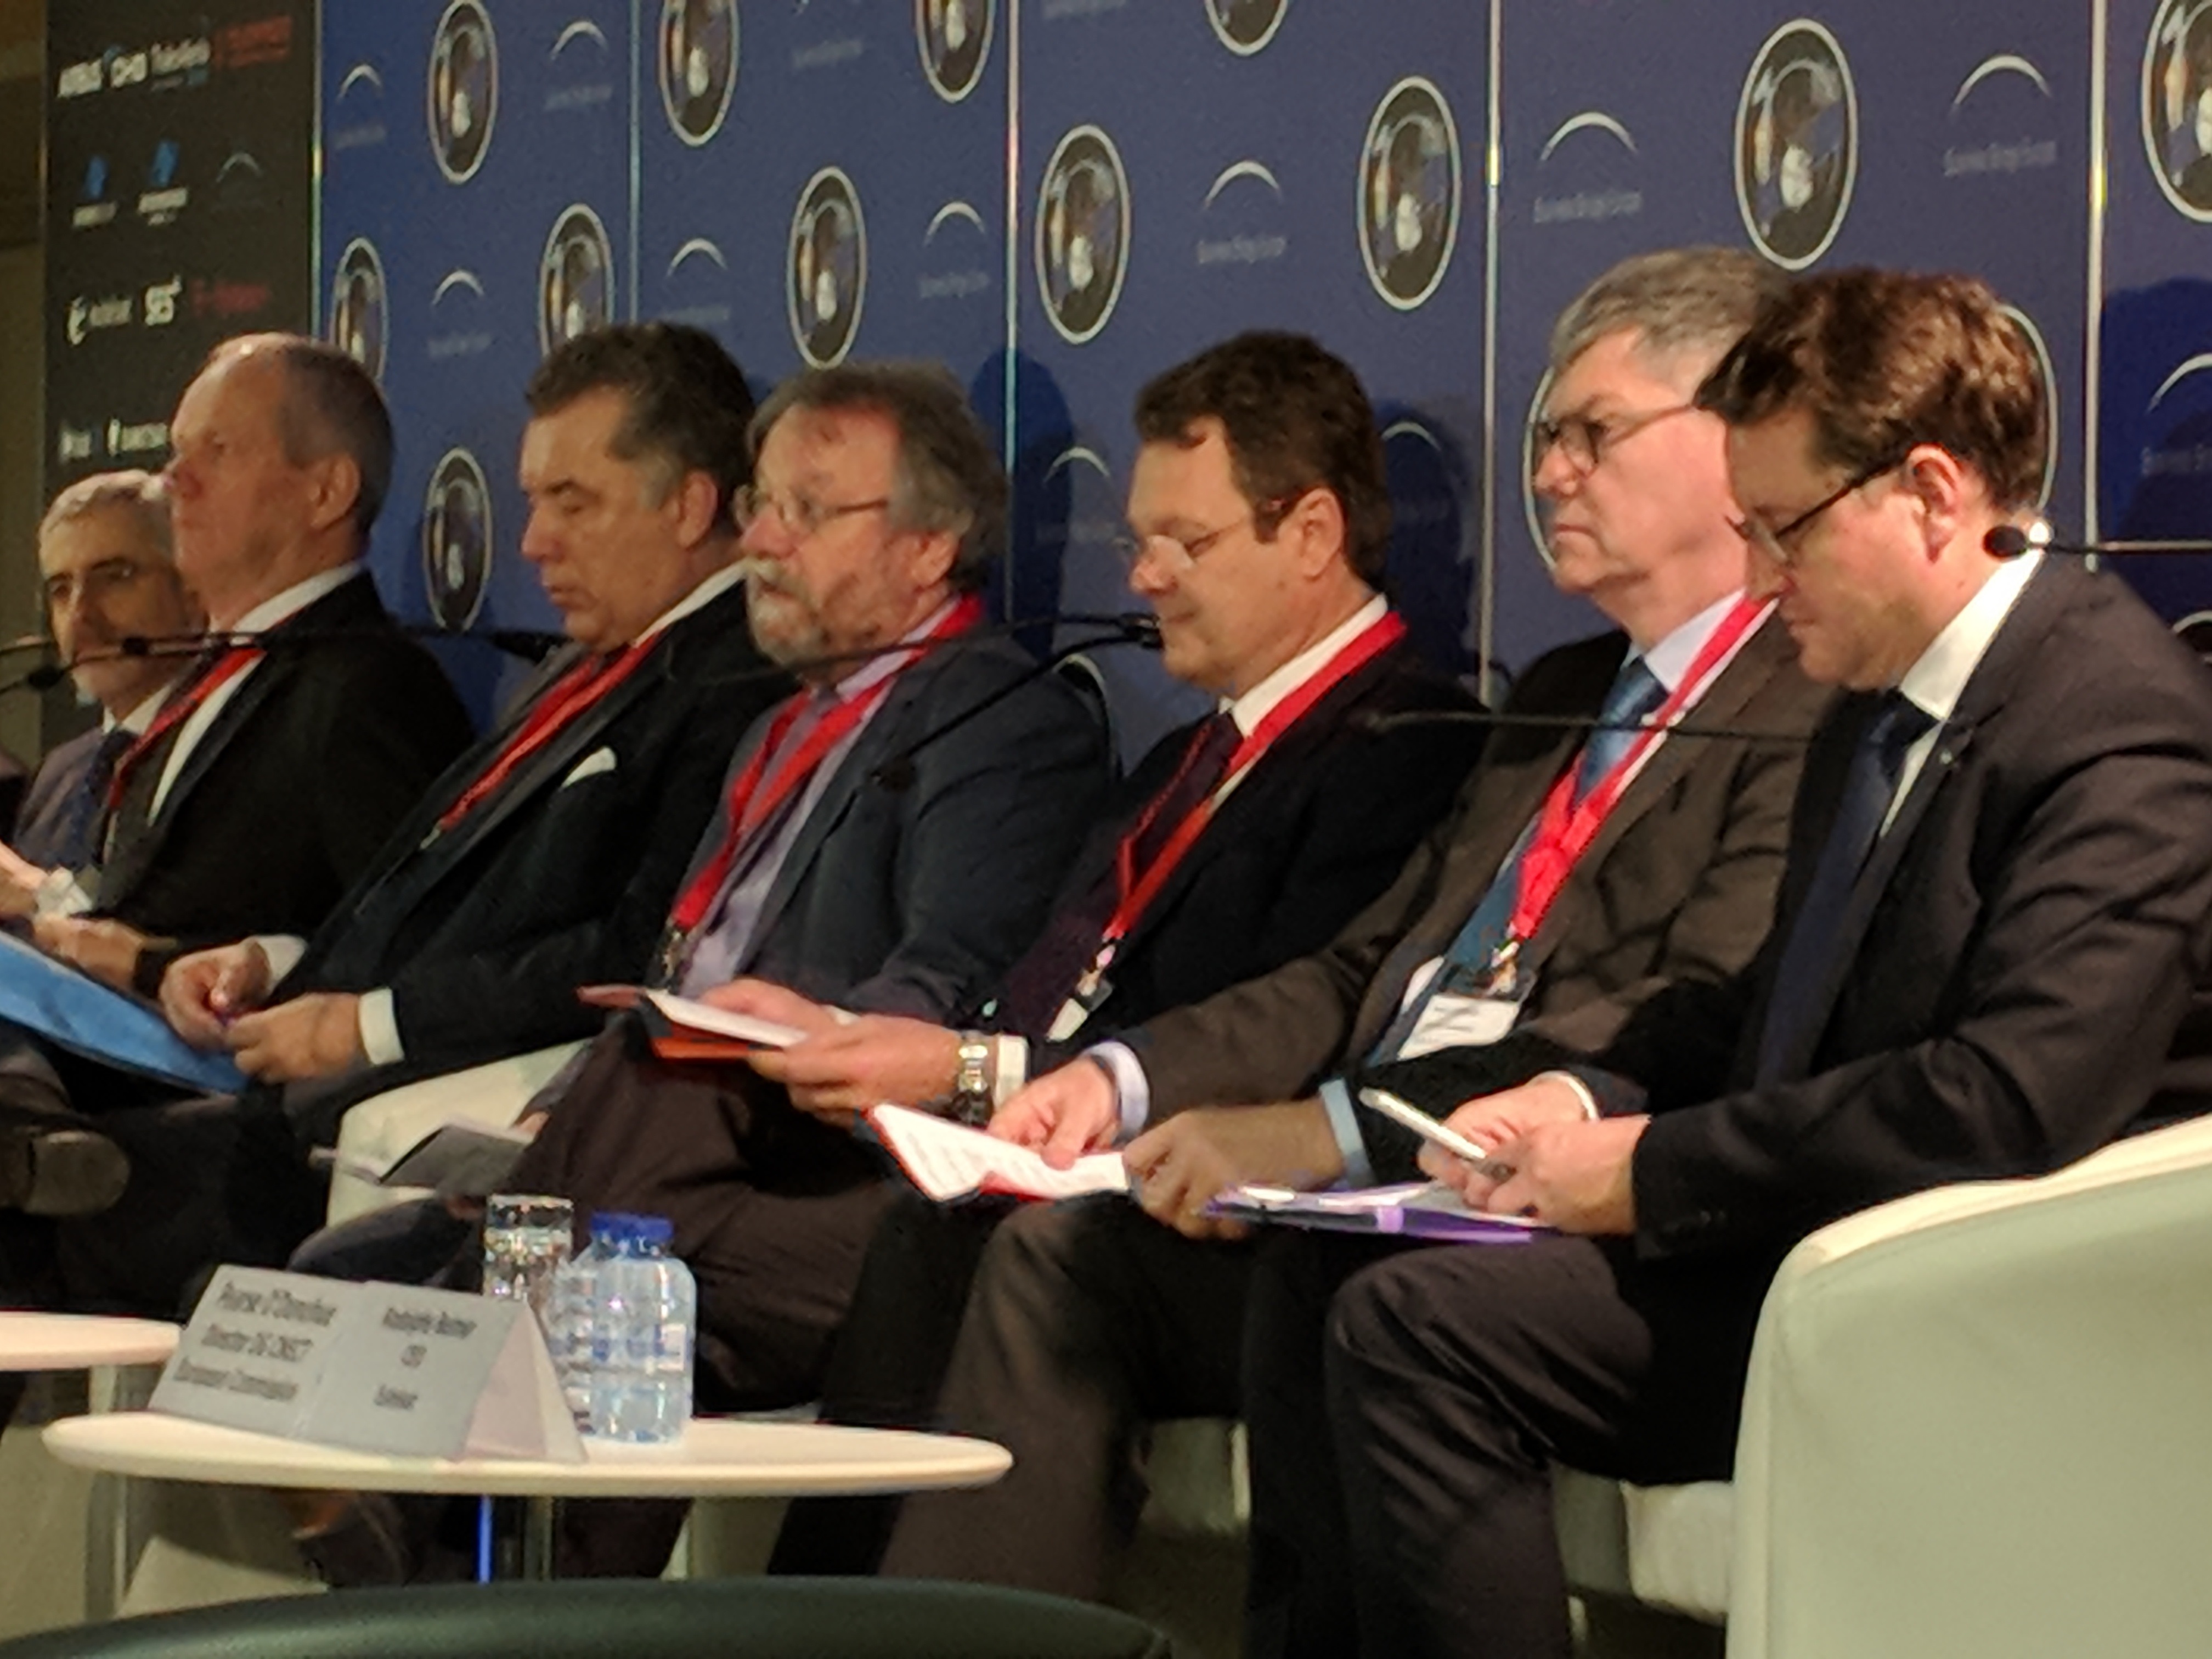 Carlo des Dorides (third from right) at the Tenth European Space Policy Conference